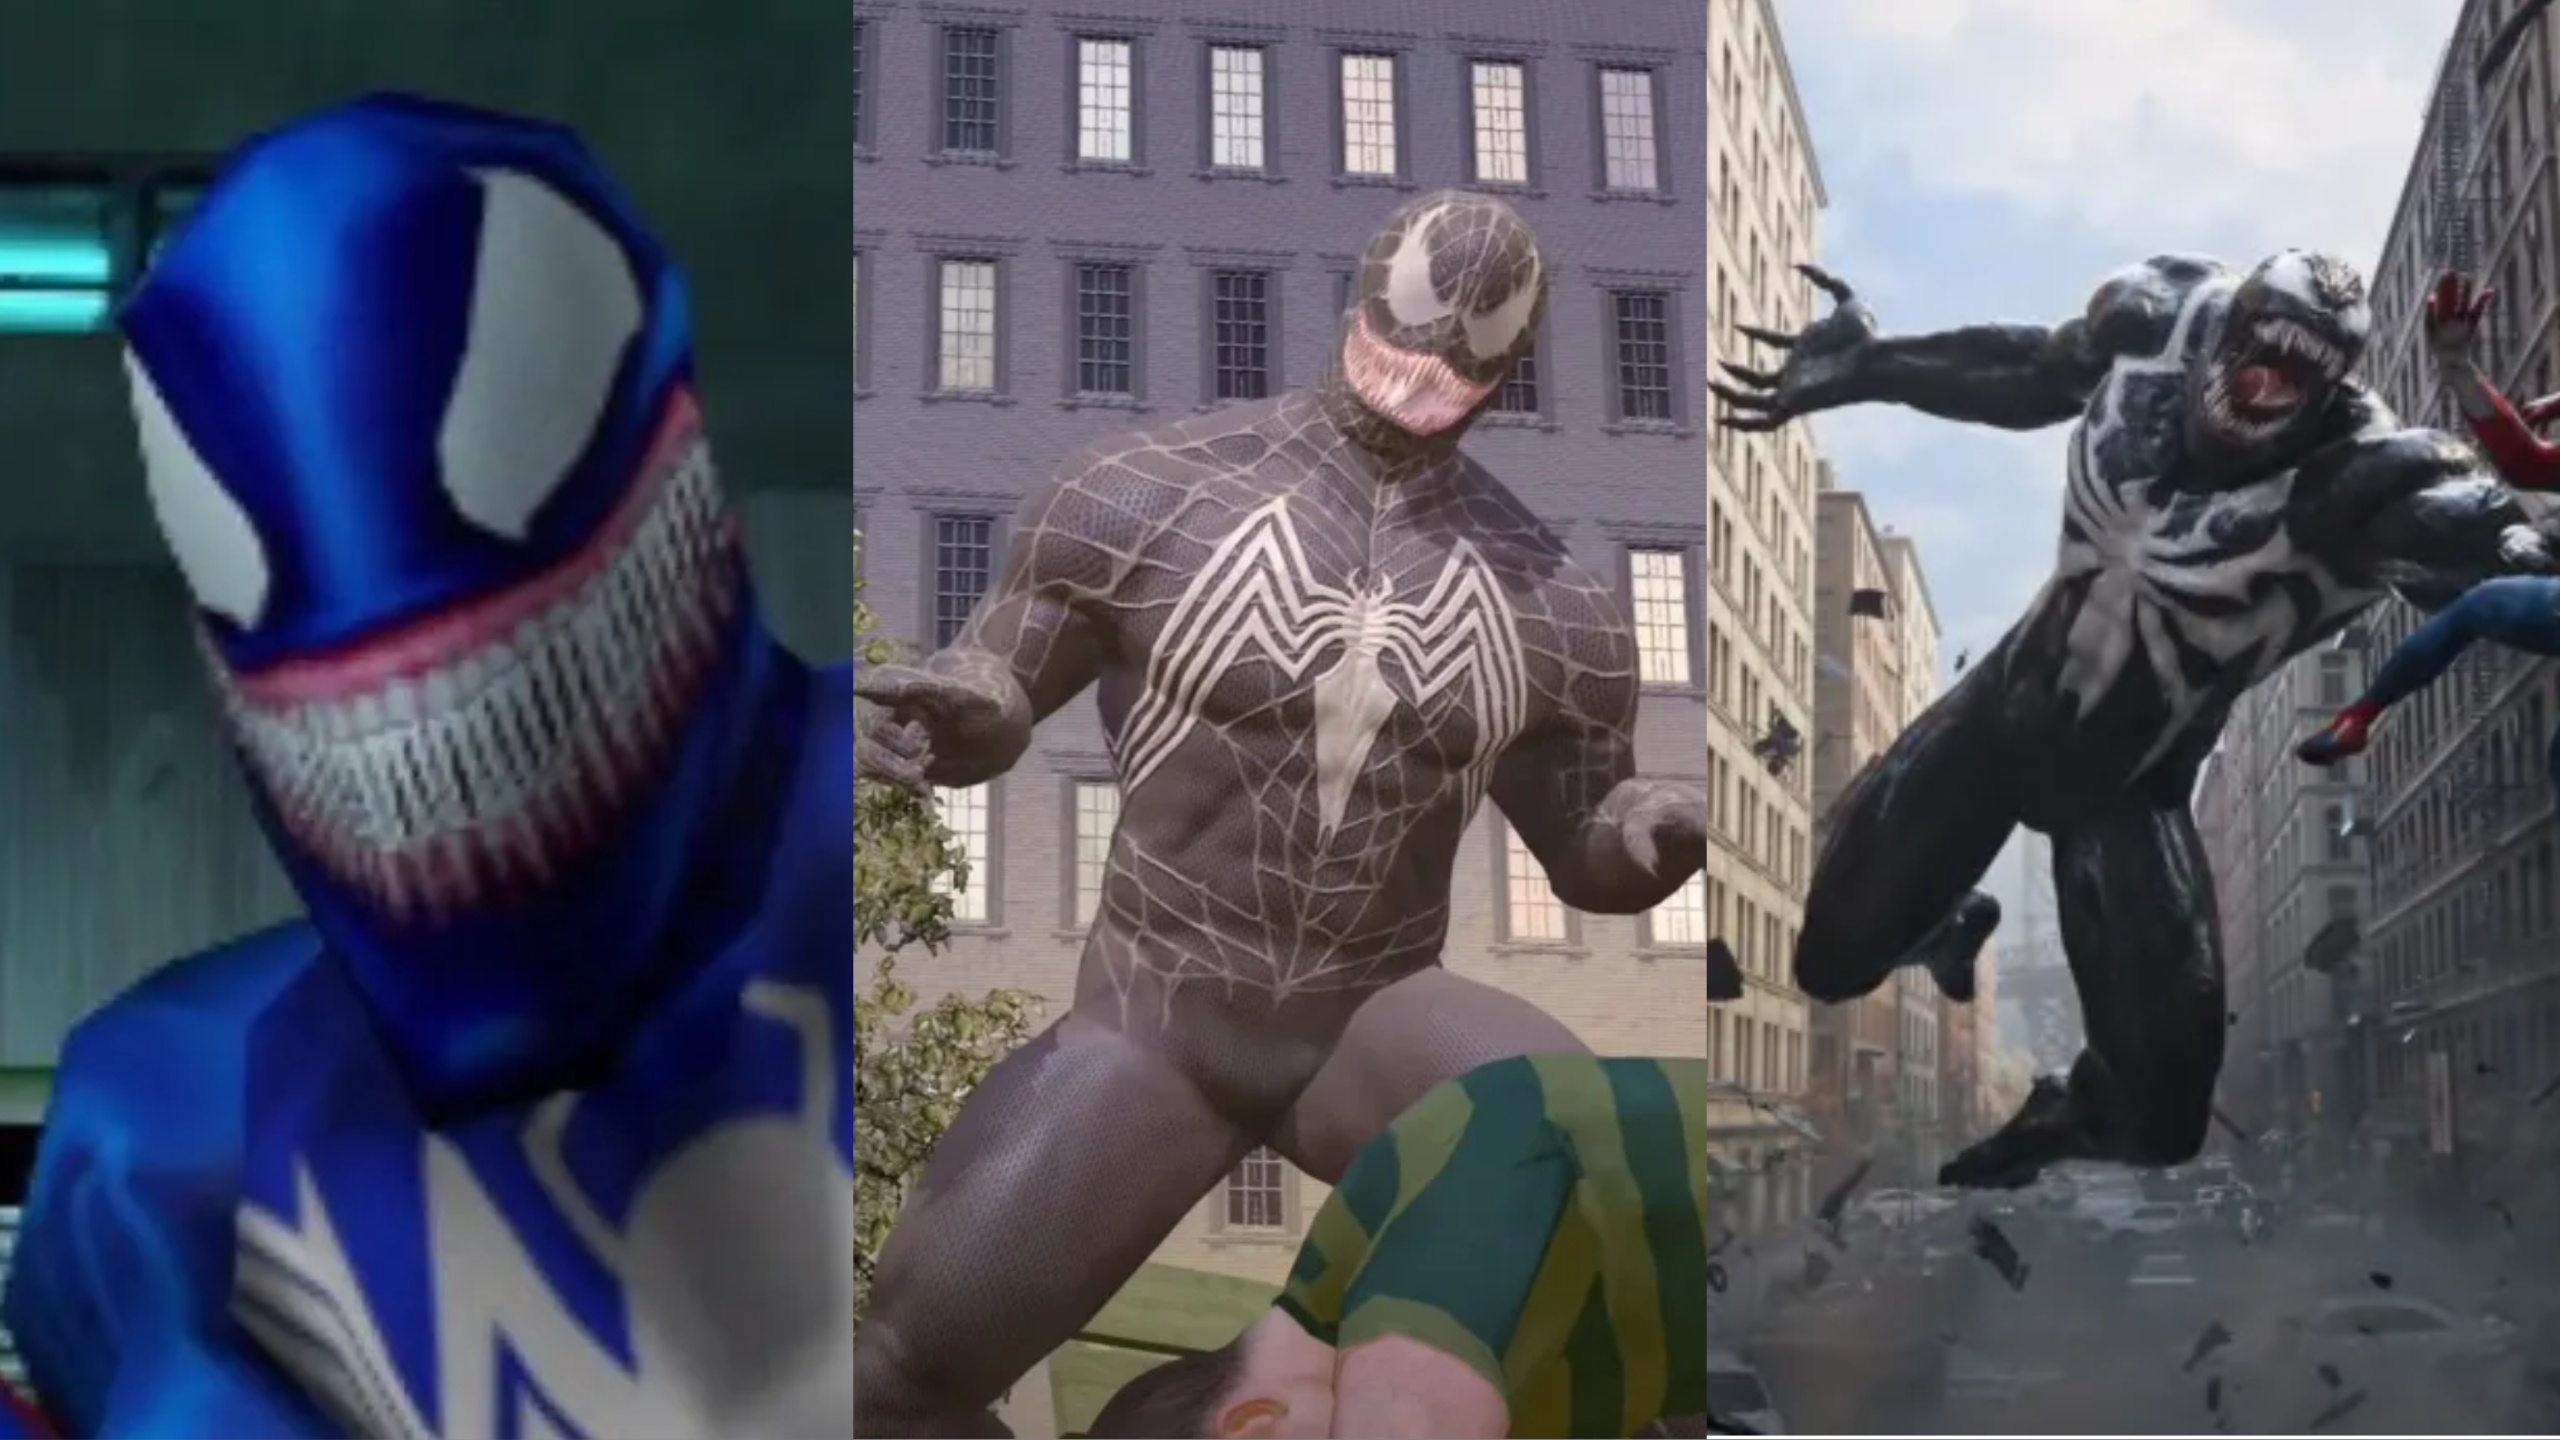 5 best Spider-Man games where you can play as Venom, ranked